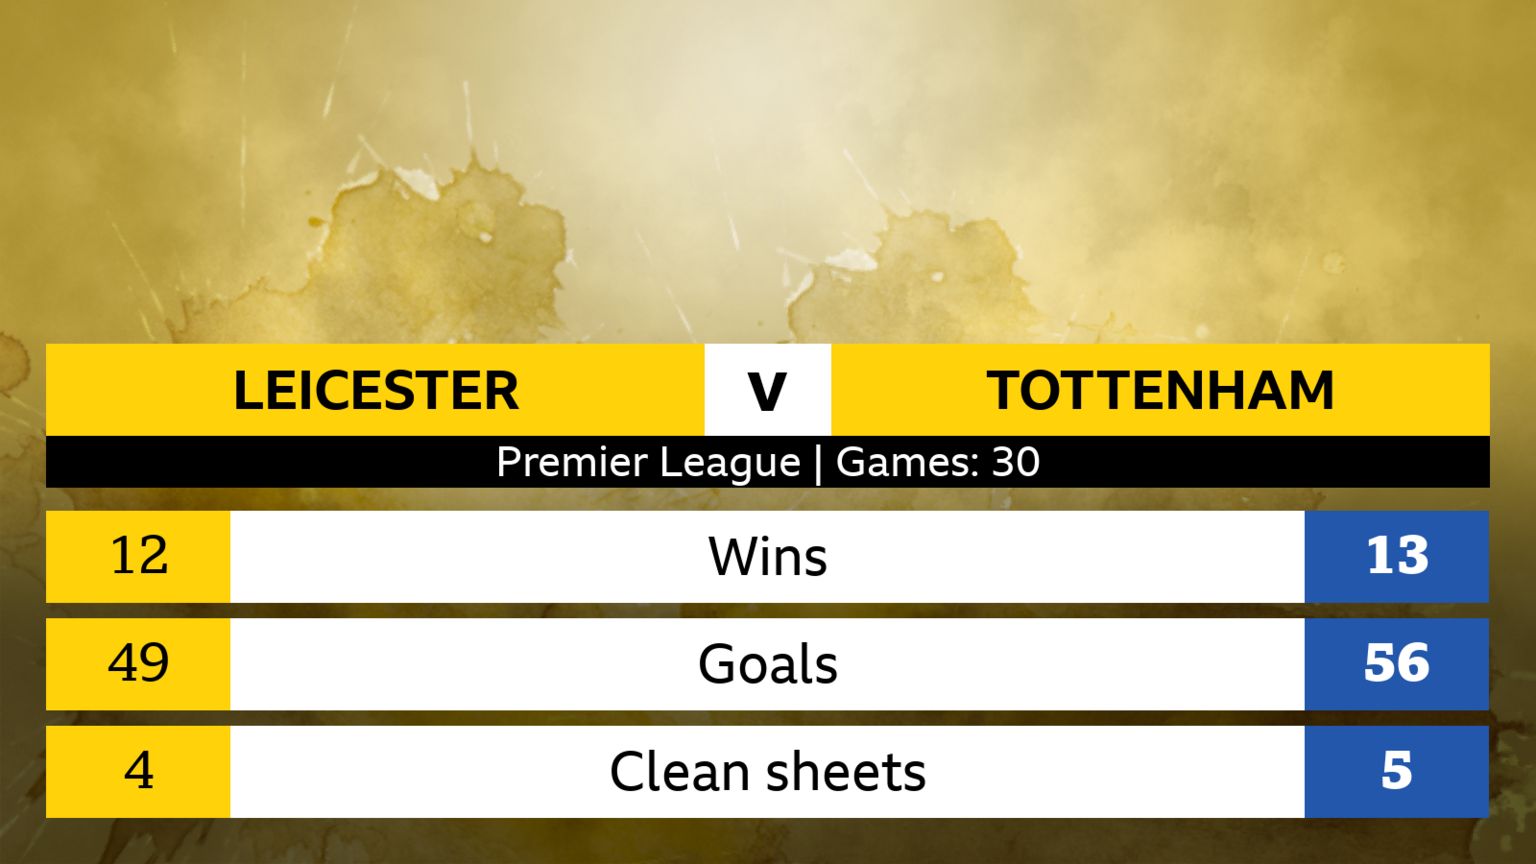 Leicester v Tottenham head to head stats. Premier League: 30 games. Leicester - Wins 12, goals 49, 4 clean sheets. Tottenham - wins 13, goals, 56, clean sheets 5.